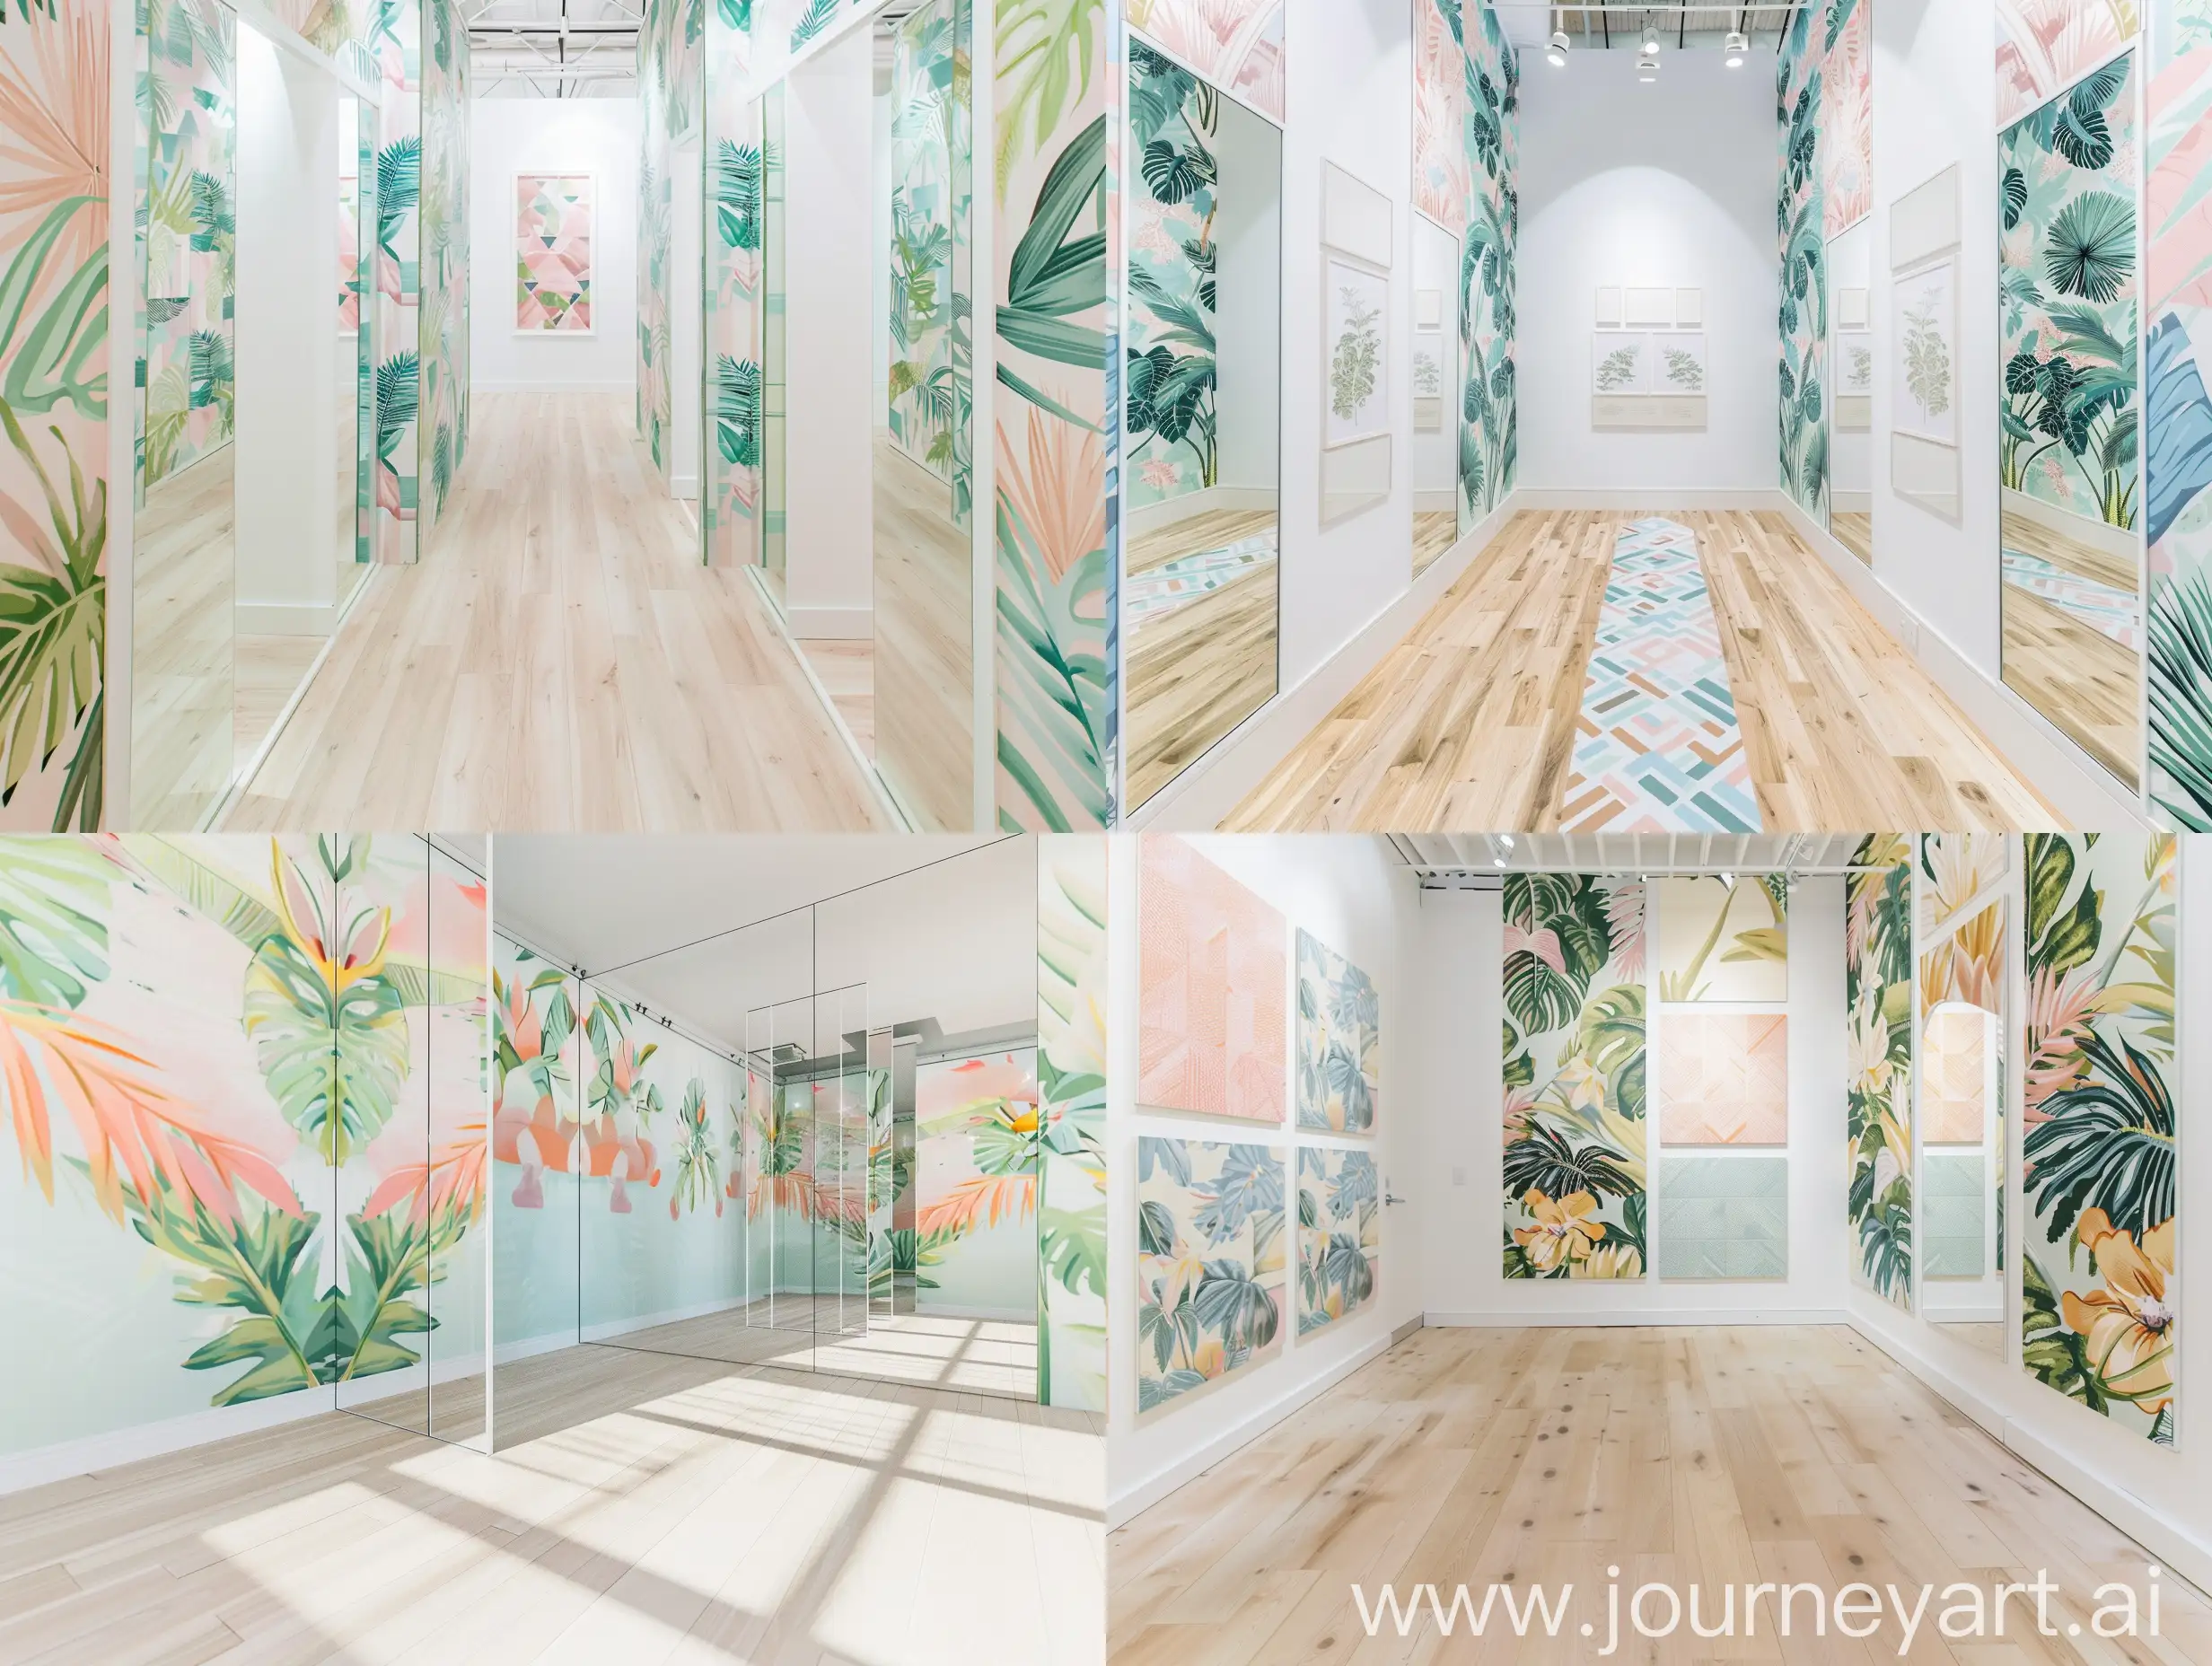 Popup-Event-Space-with-Pastel-Geometric-Flooring-and-Miami-Art-Deco-Inspired-Decor